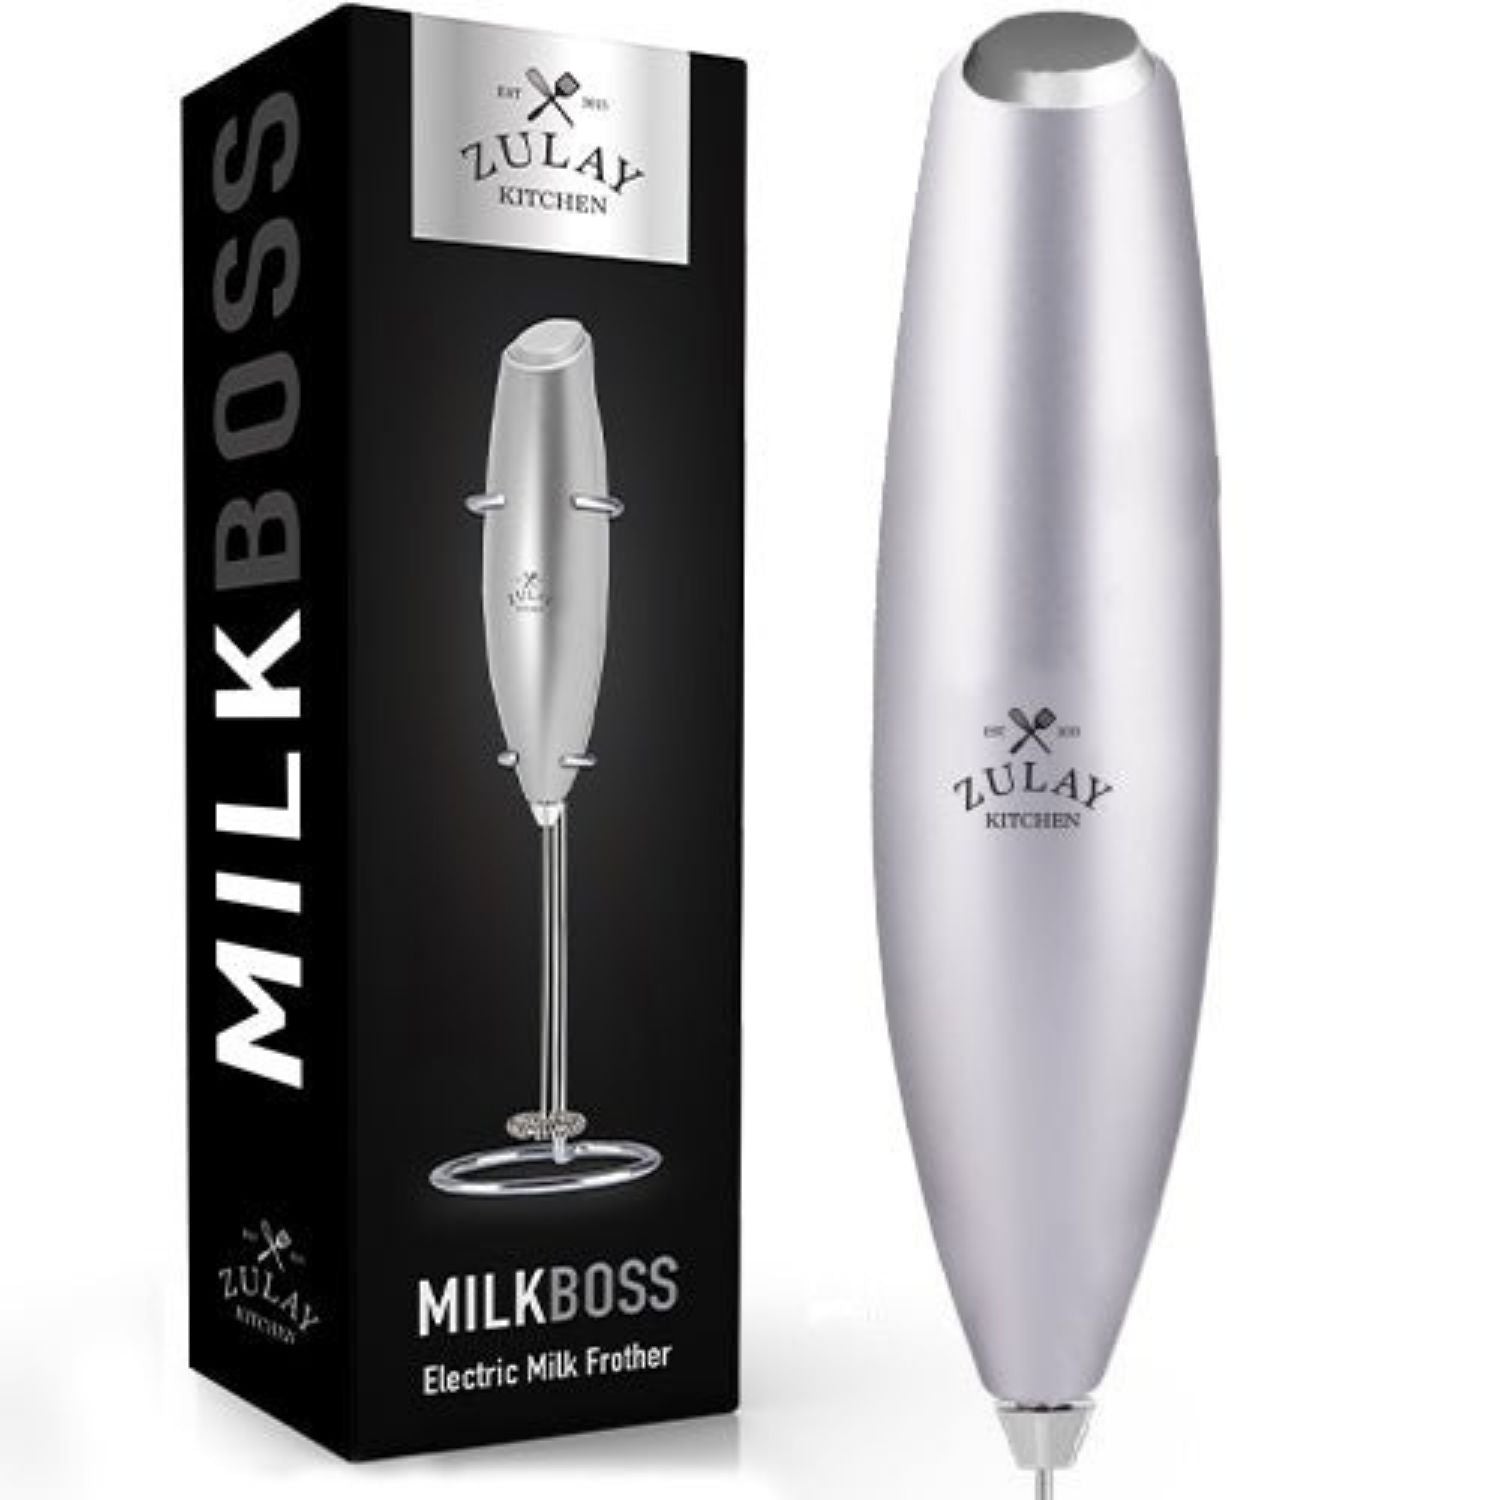 SIMPLETASTE Milk Frother Handheld Battery Operated Electric Silver/Black